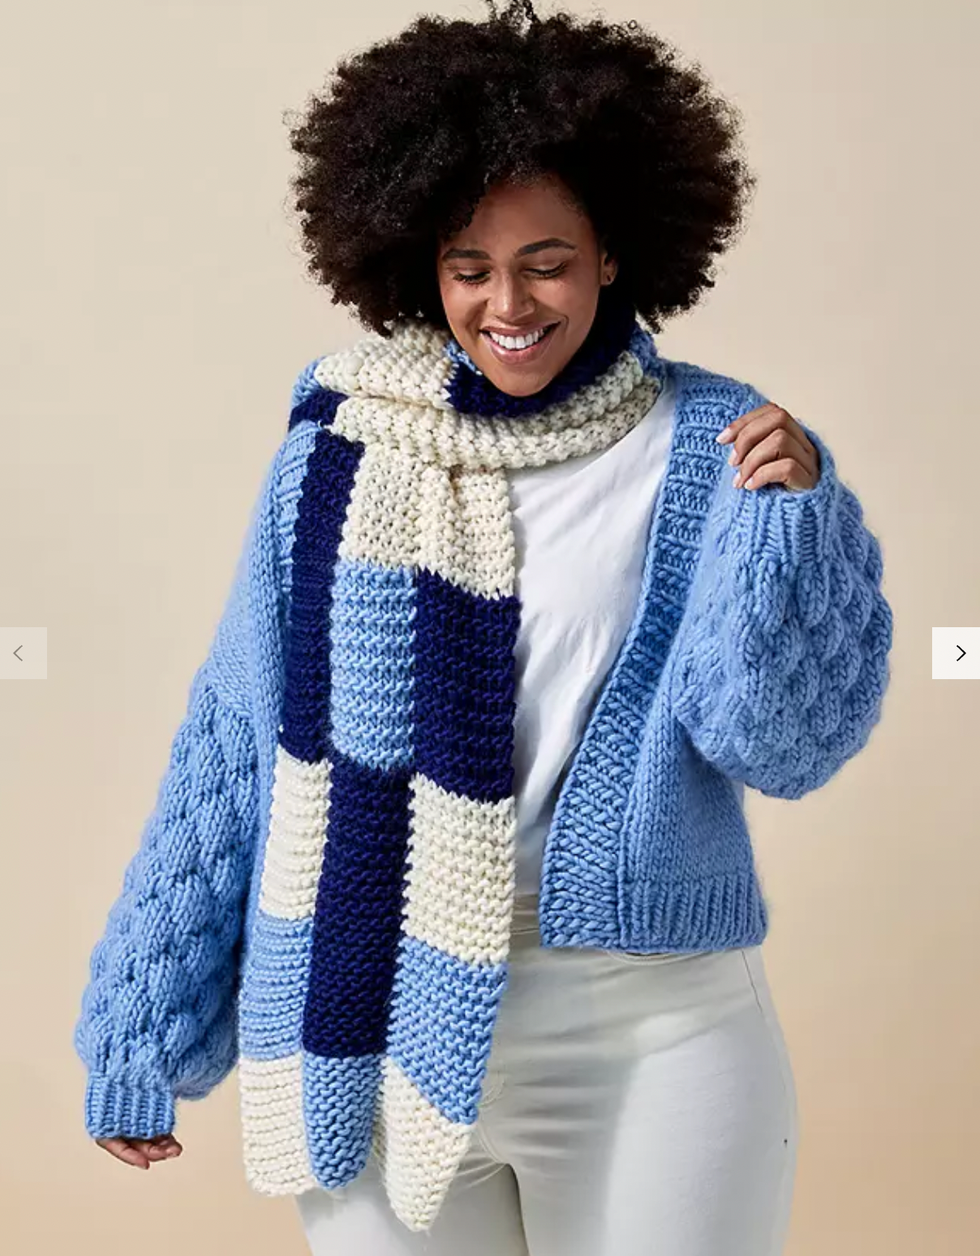 Tom Daley's knitwear range is now available to buy at John Lewis